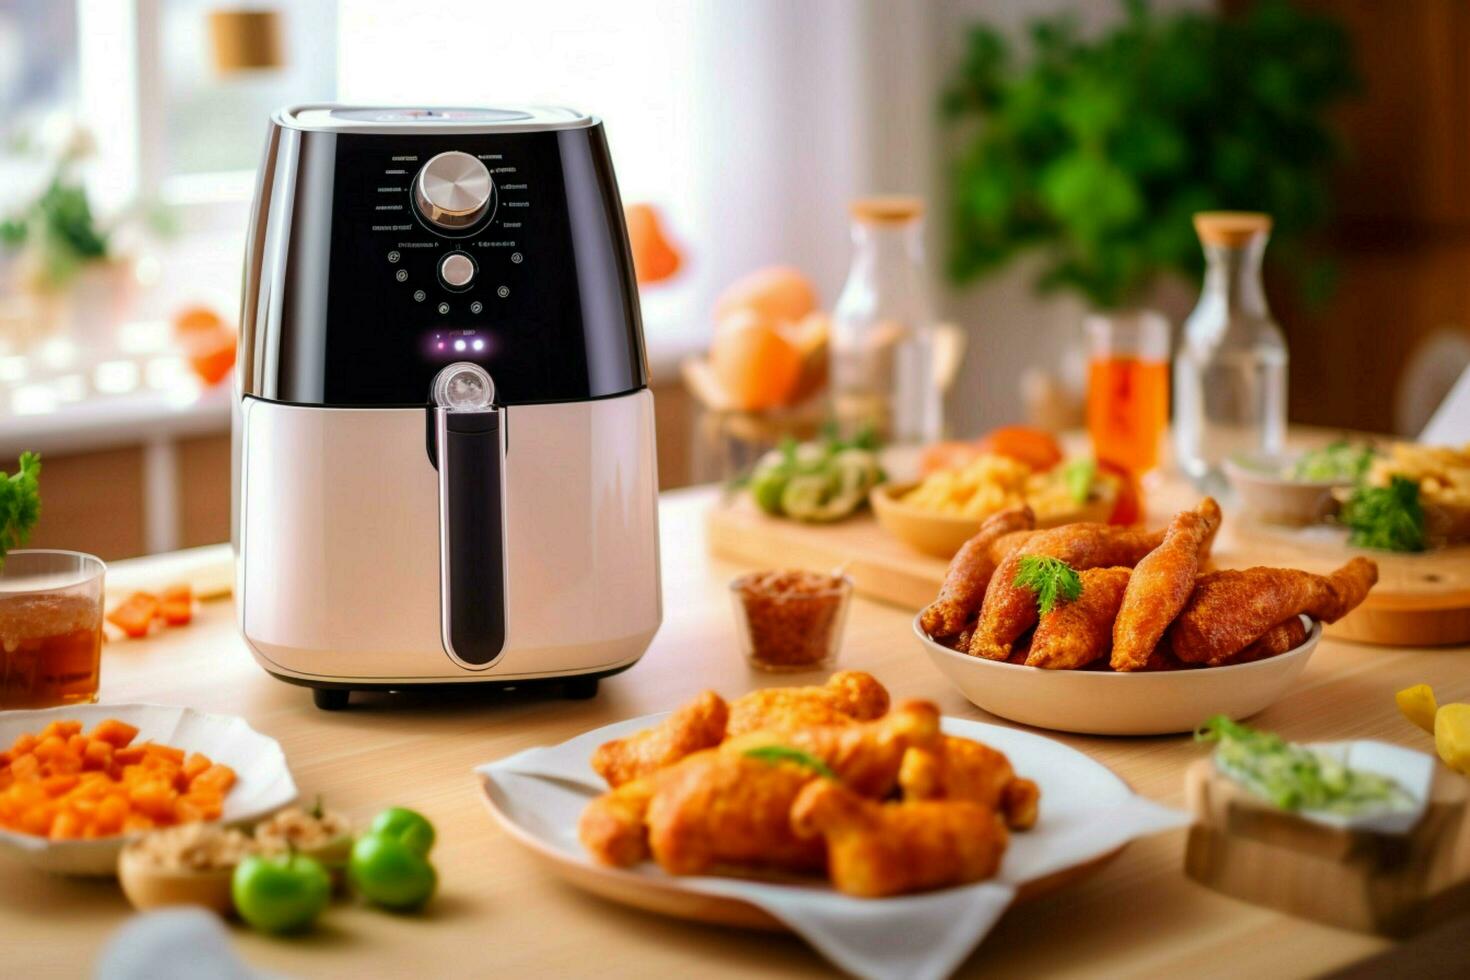 Realistic photo of air fryer on a table full of ric